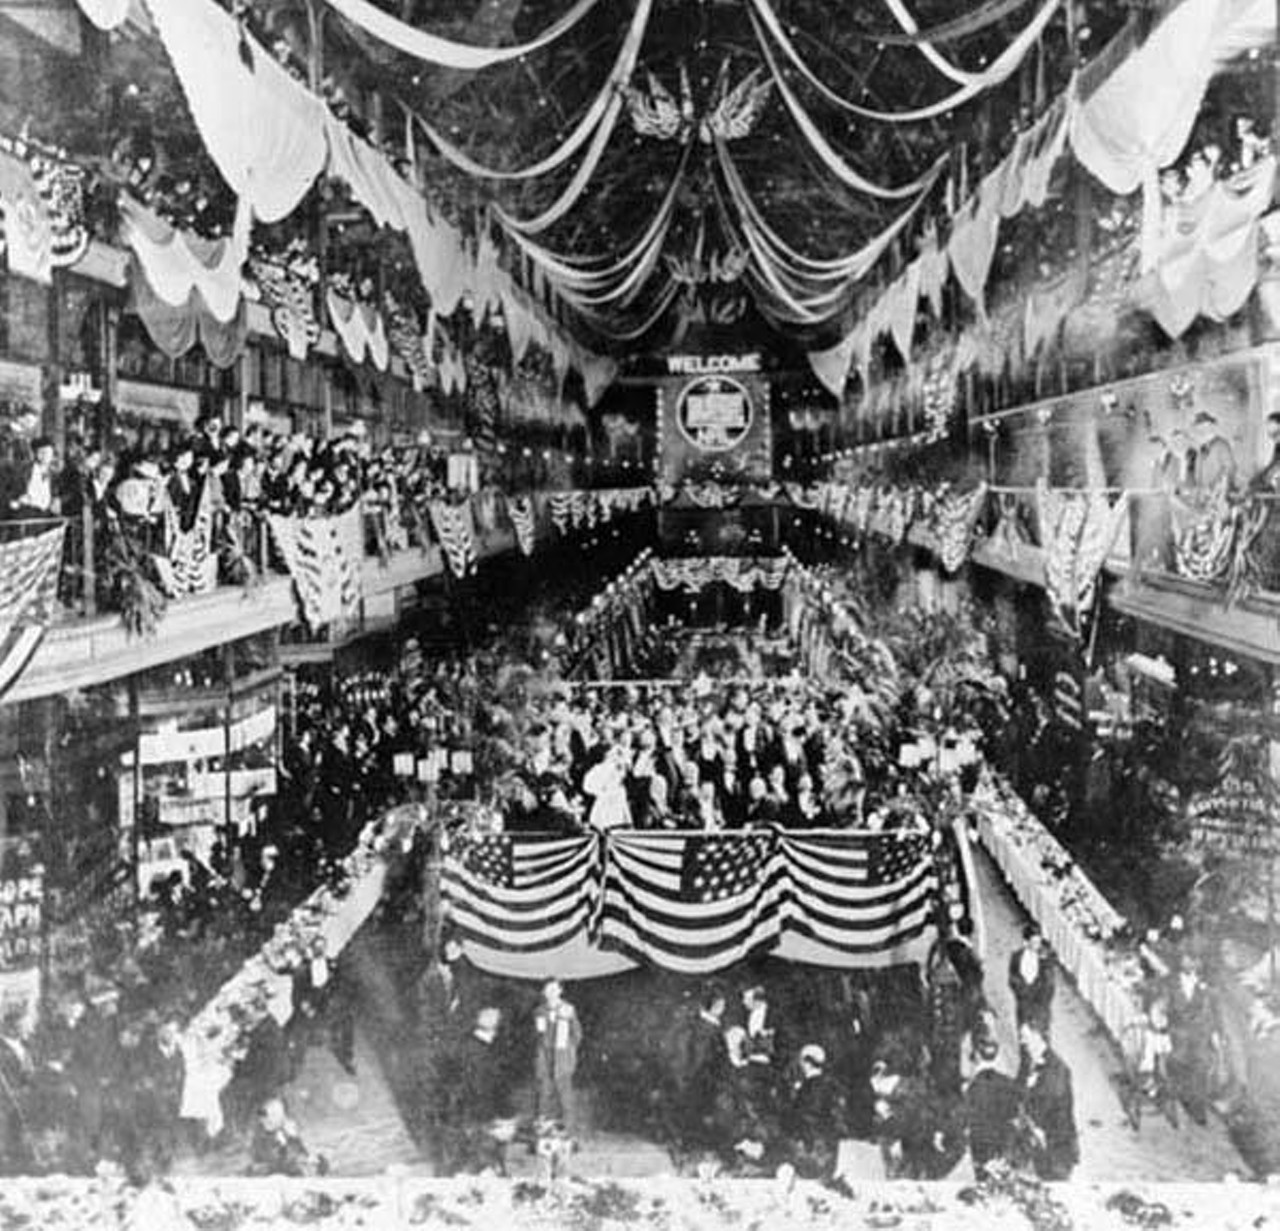 National Convention of Republican Clubs at Cleveland Arcade, 1895